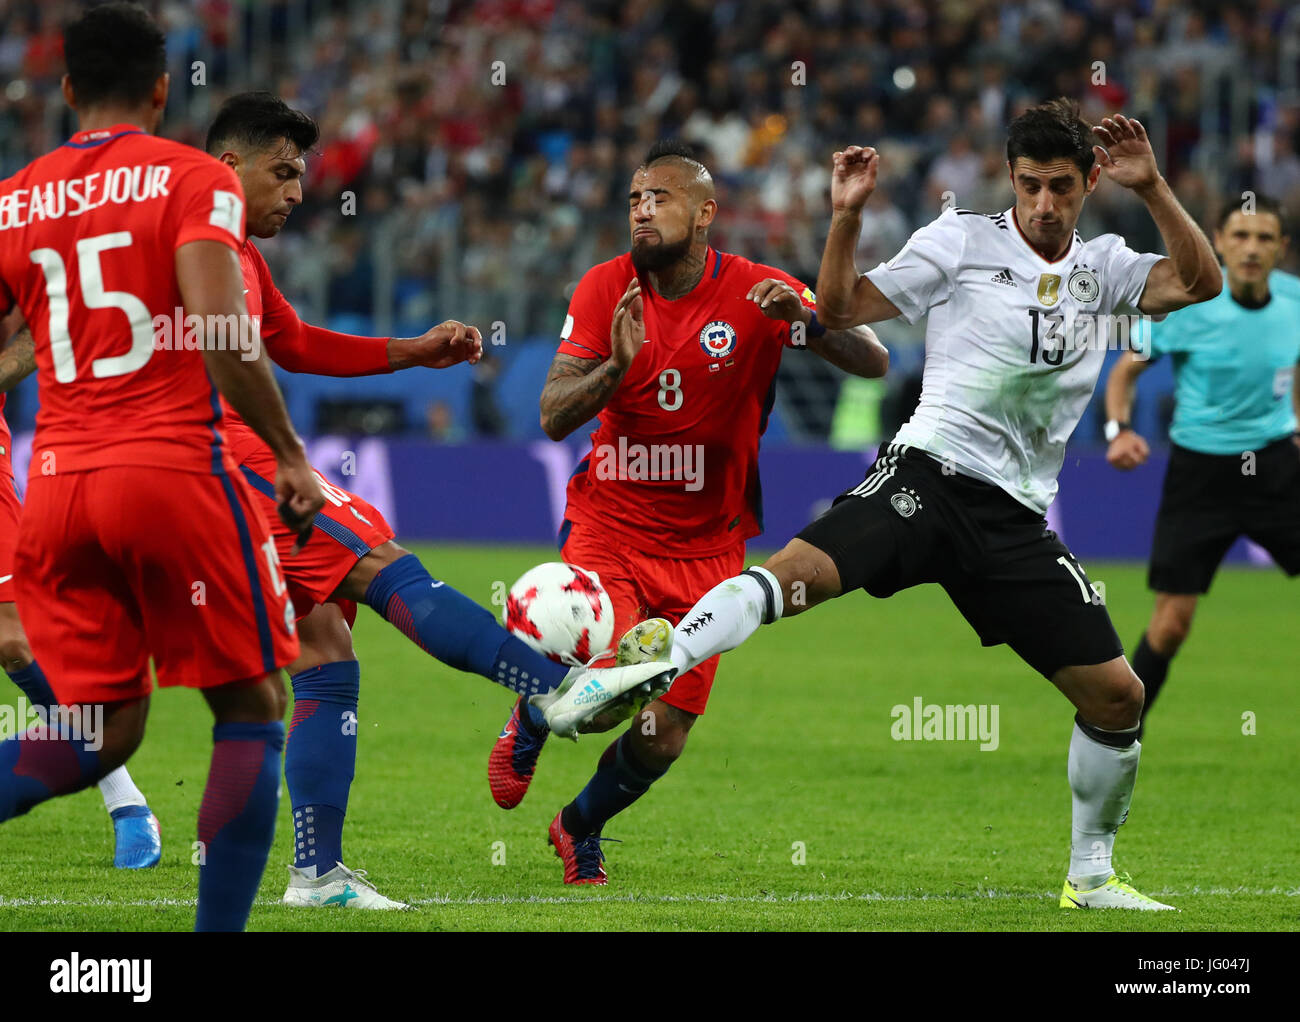 Saint Petersburg, Russia. 2nd July, 2017. Chile's Gonzalo Jara and Arturo Vidal (c) and Germany's Lars Stindl in action during the Confederations Cup finale between Chile and Germany at the Saint Petersburg Stadium in Saint Petersburg, Russia, 2 July 2017. Photo: Christian Charisius/dpa/Alamy Live News Stock Photo